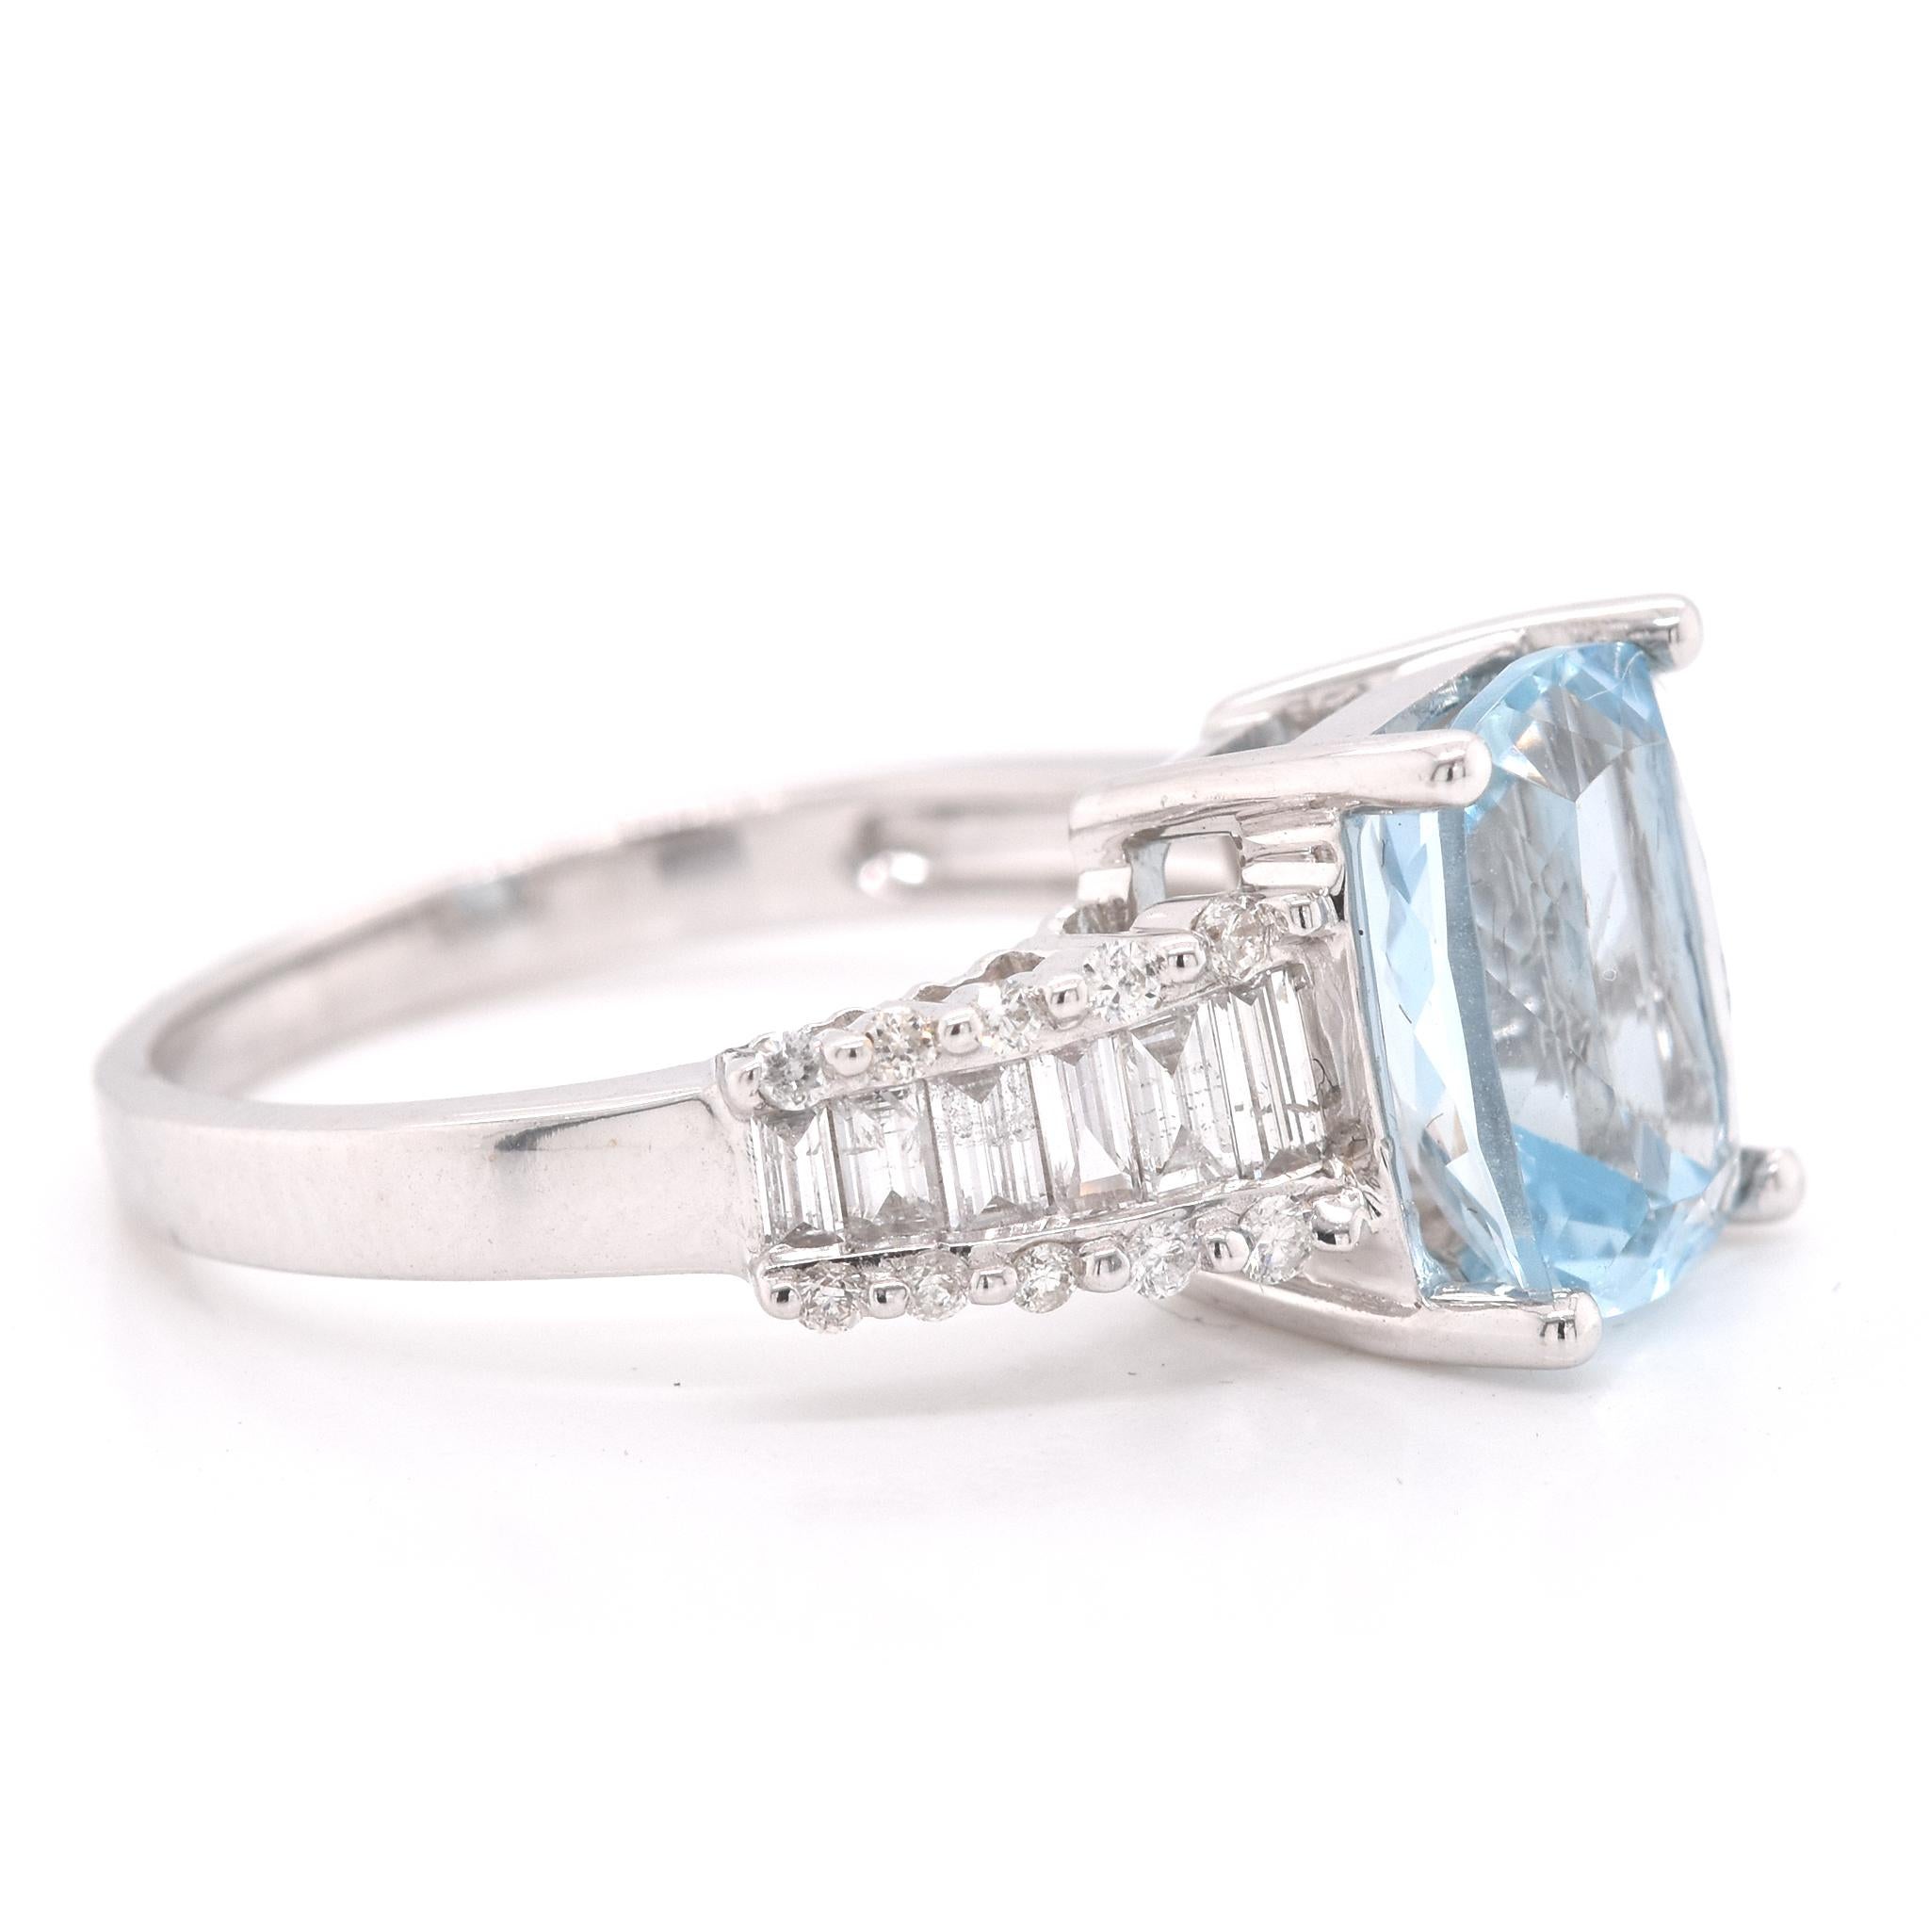 Designer: custom
Material: 14k white gold
Gemstones: Emerald Cut Aquamarine = 2.71ct
Certification: AGI 25344
Diamonds:   78 round brilliant cuts = 1.50cttw
Color: F
Clarity: VS2-SI
Ring Size: 7.5 (please allow two additional shipping days for